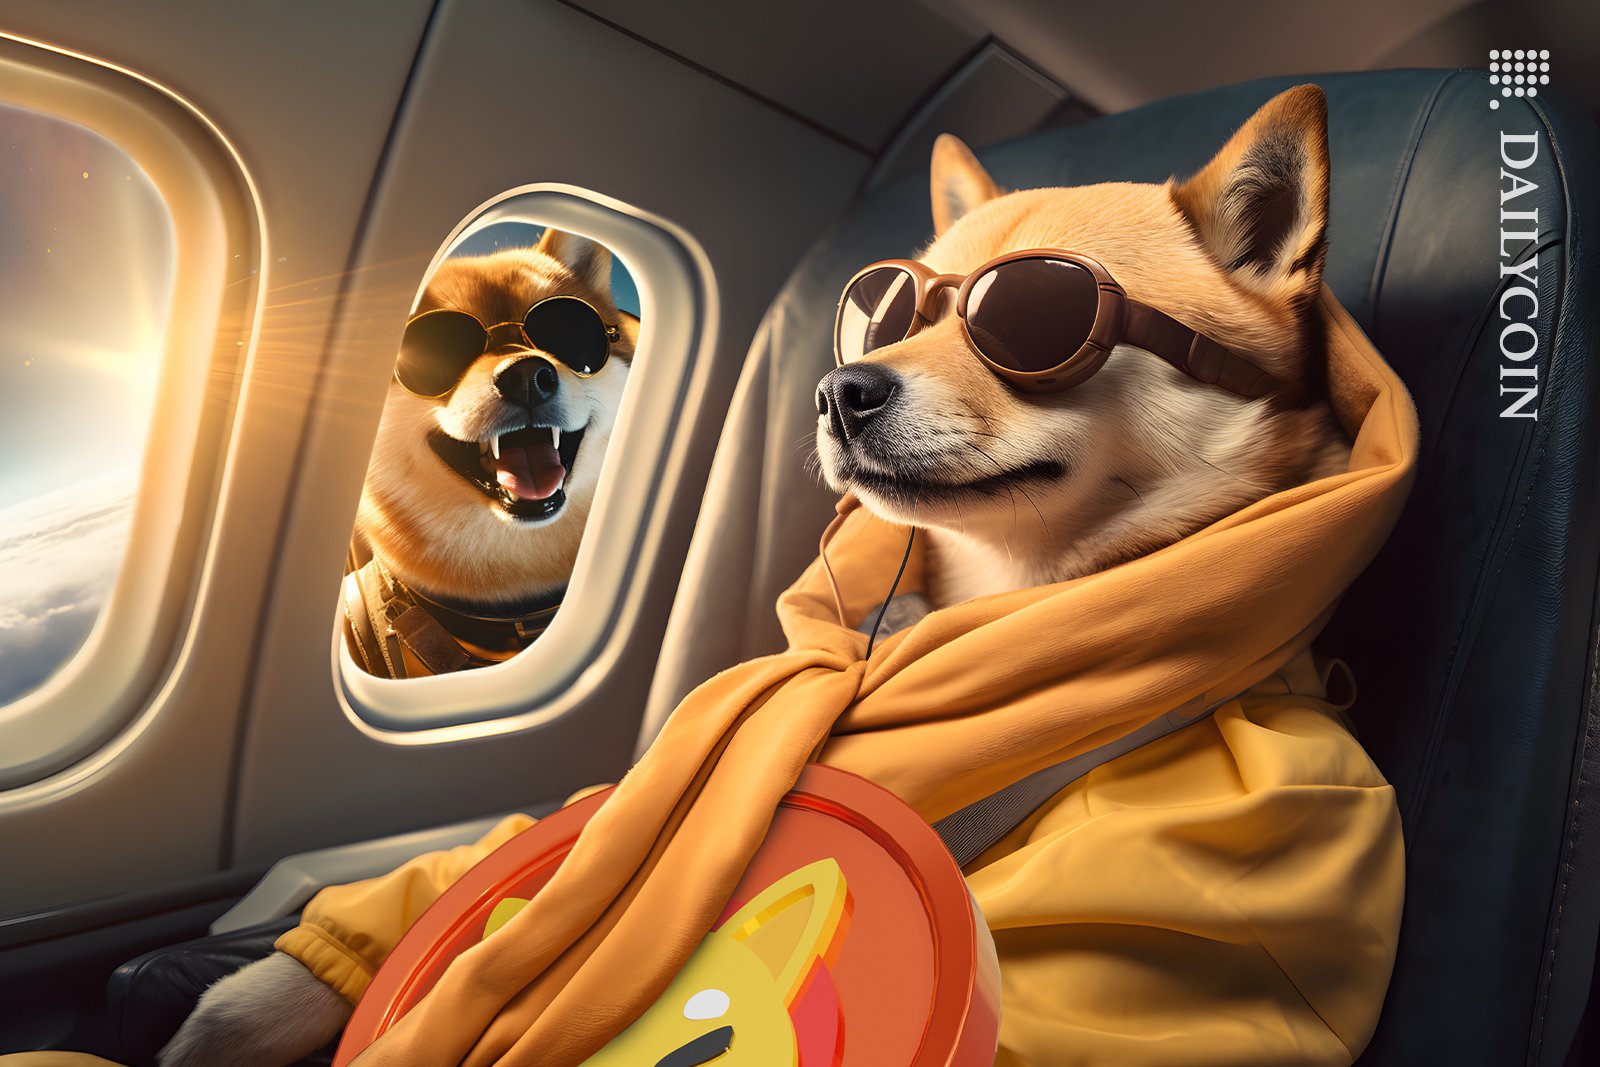 Shiba Inu's top dog flying on an airplane. Shib in space checking on him.